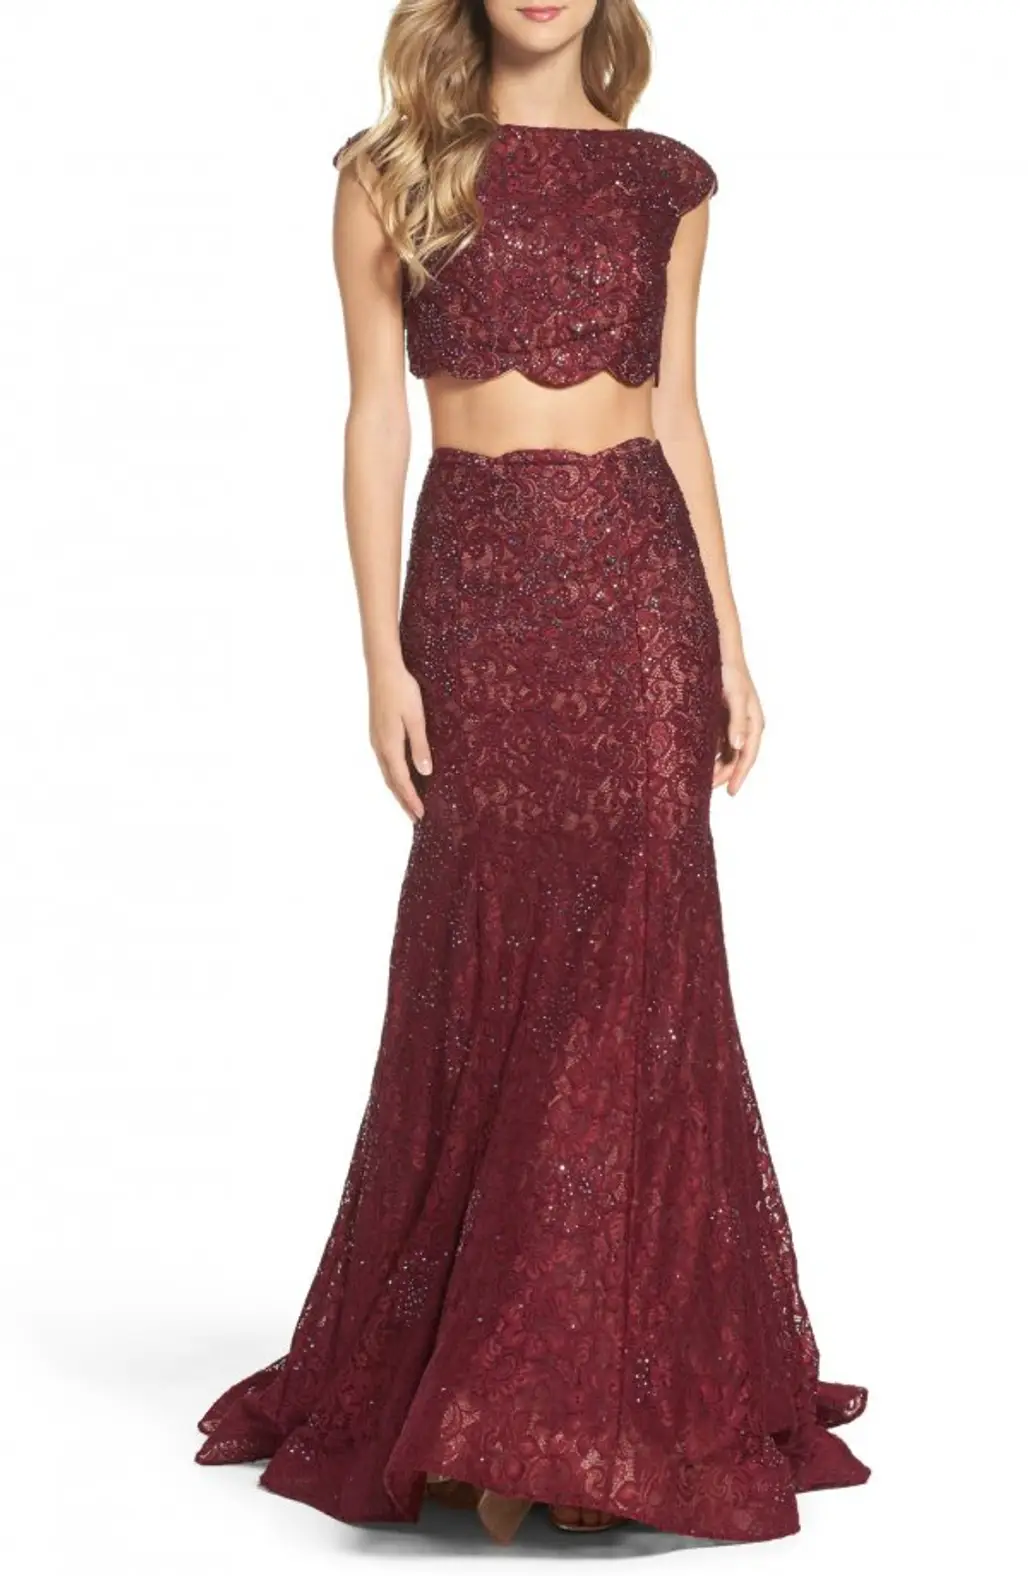 dress, clothing, day dress, gown, maroon,